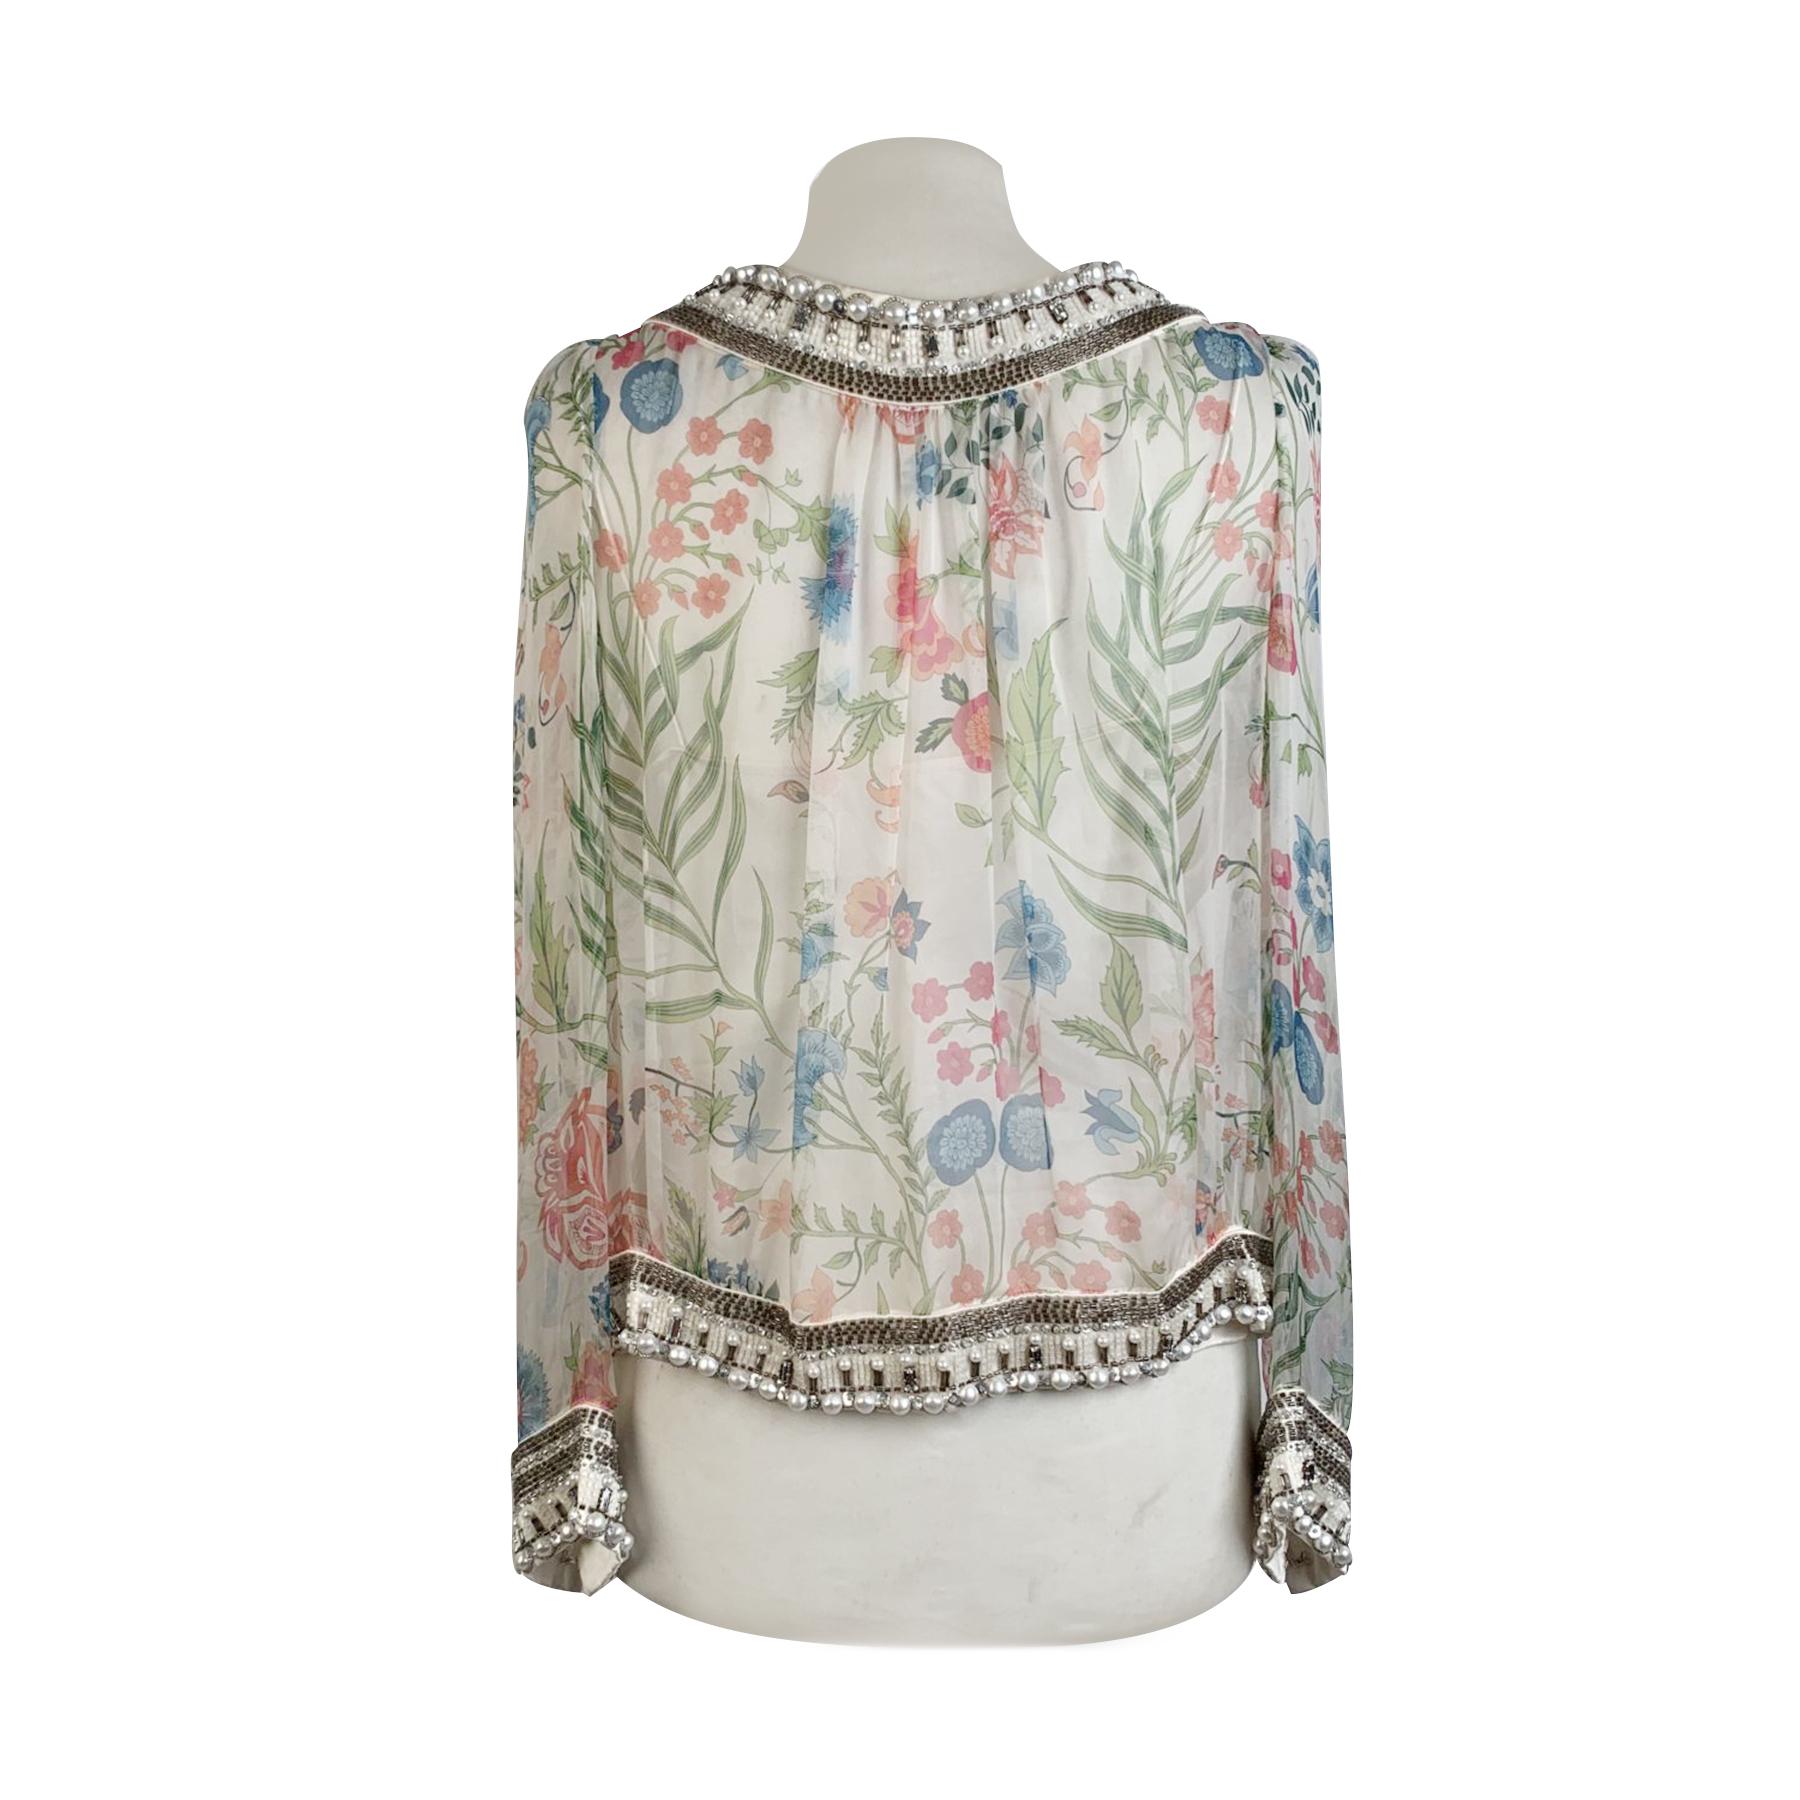 Christian Dior embellished layered top in silk chiffon. Sheer fabric. It features beads and crystale embellishemrnt along the satin trim, bow detailing, long sleeve styling with hook and eye closure, and a silk satin cami top underlay, Composition